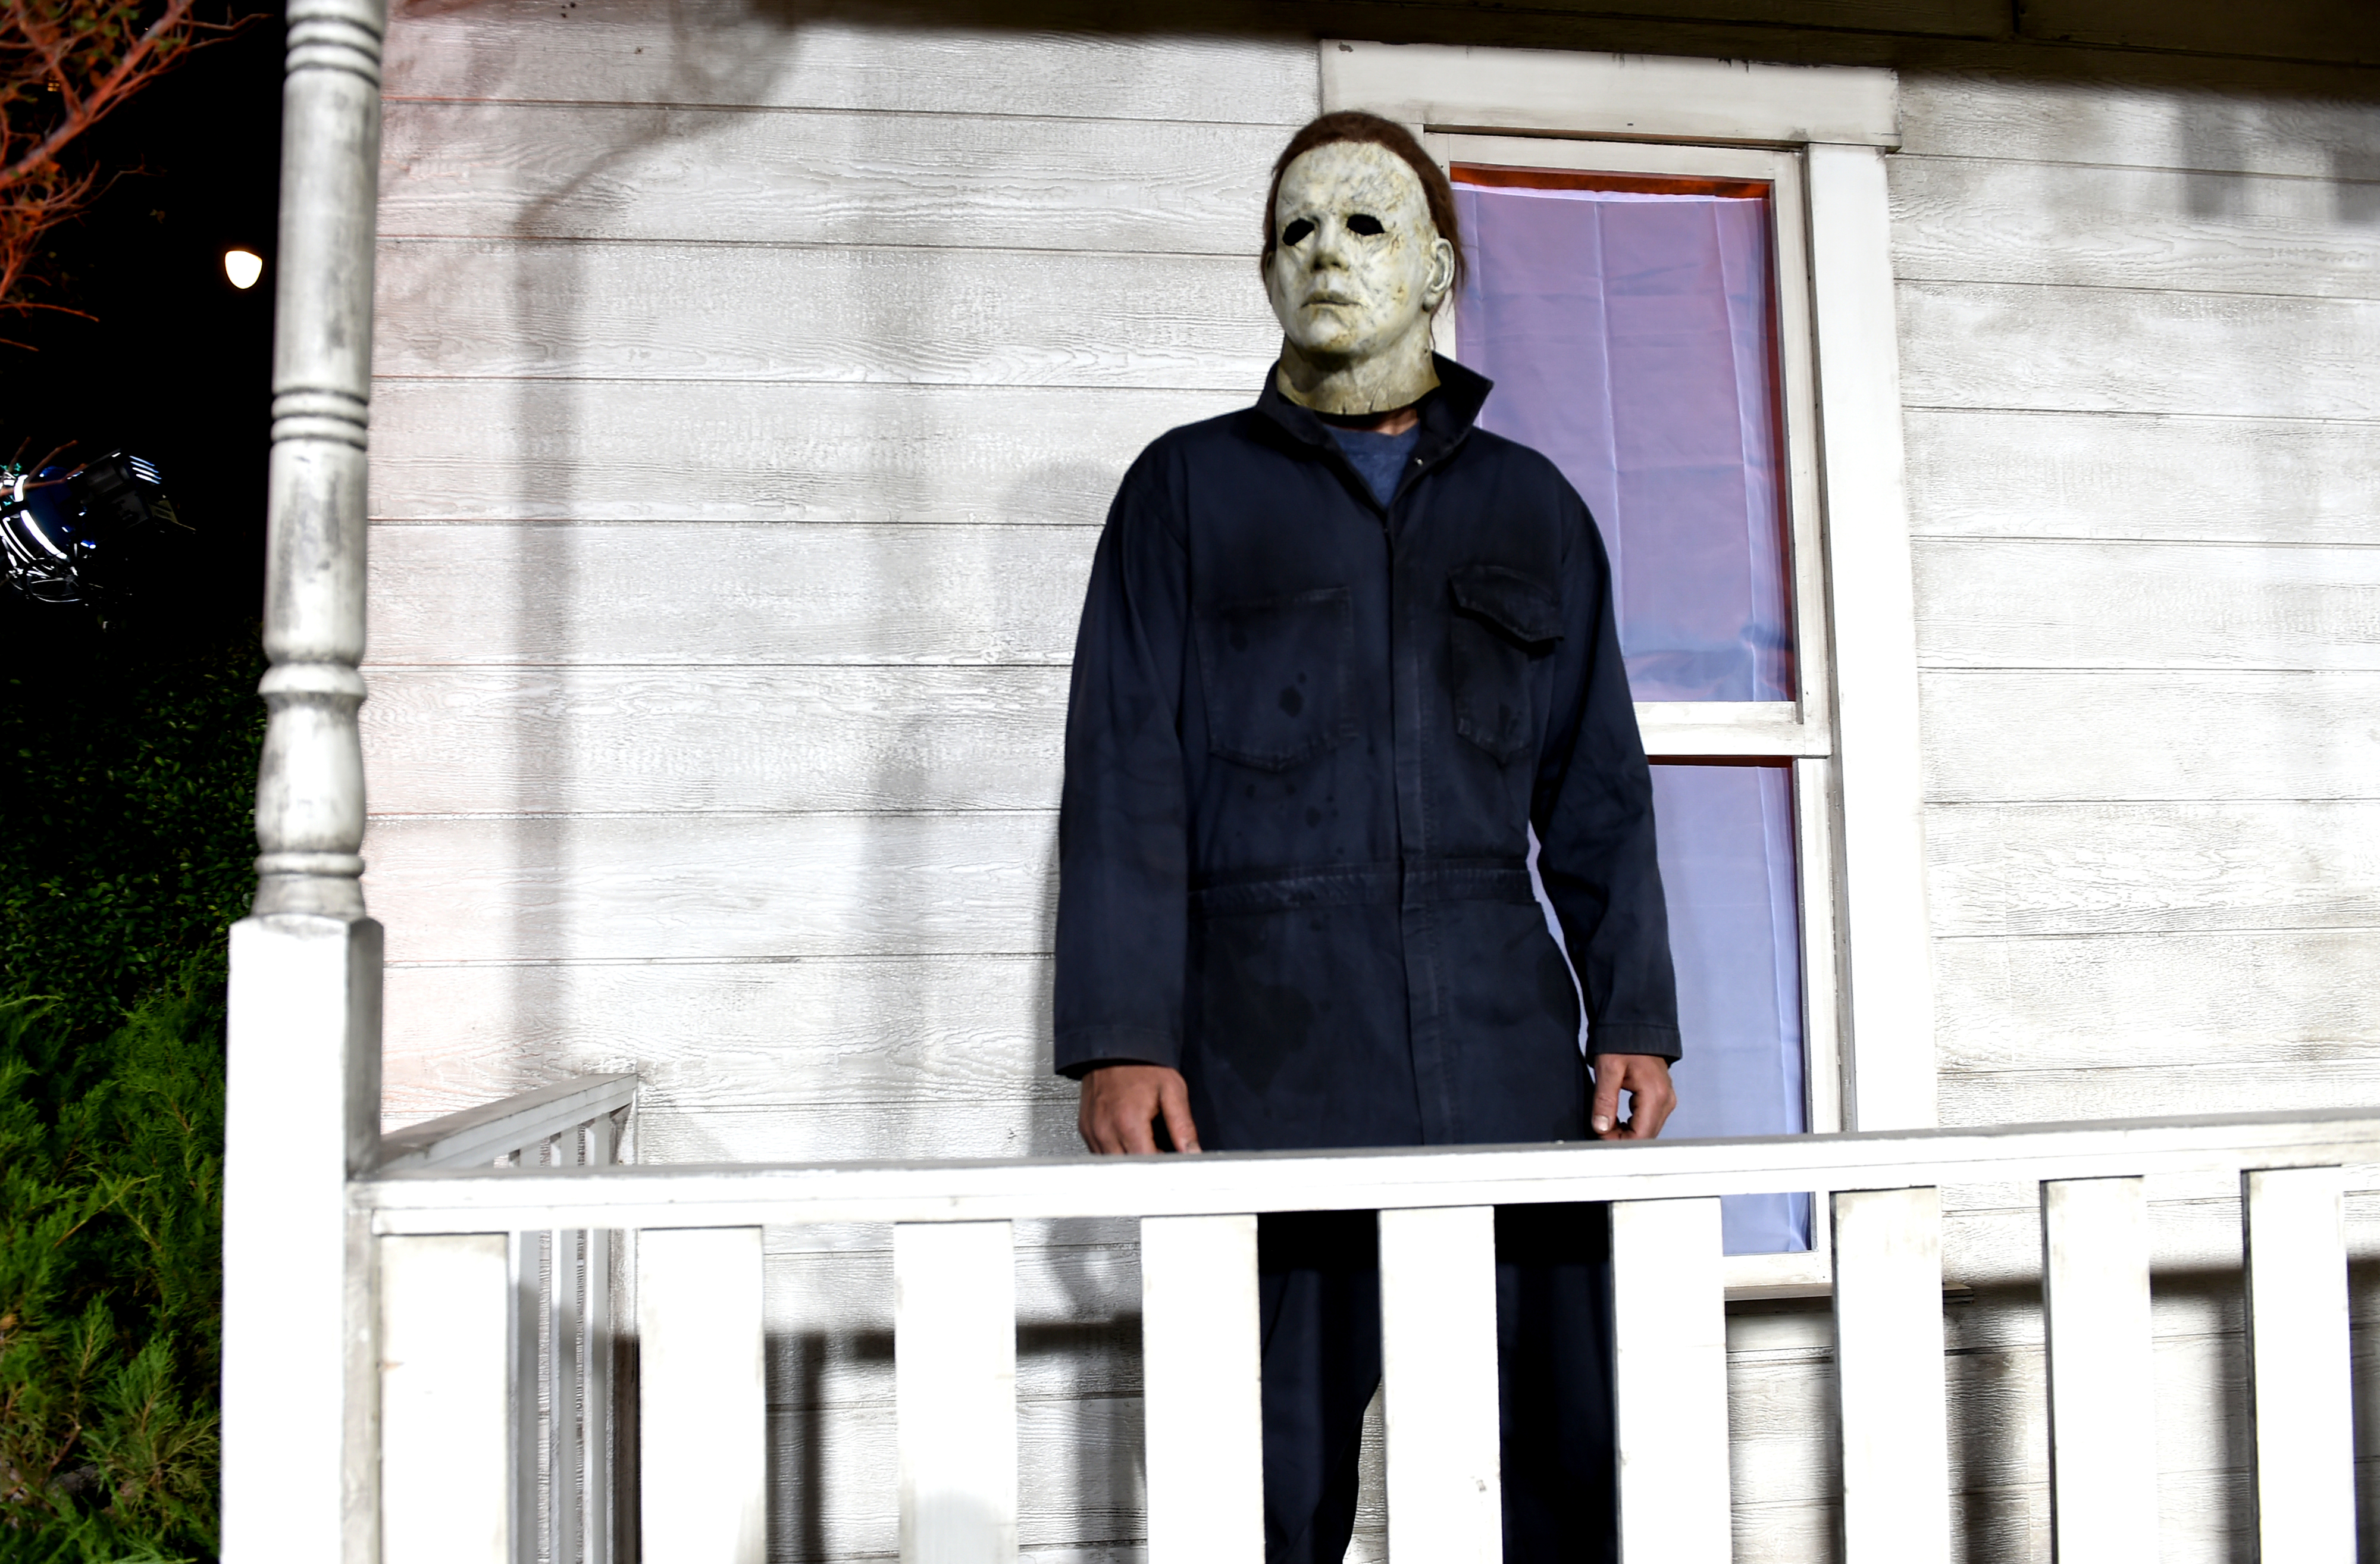 An actor dressed as Michael Myers outside a house